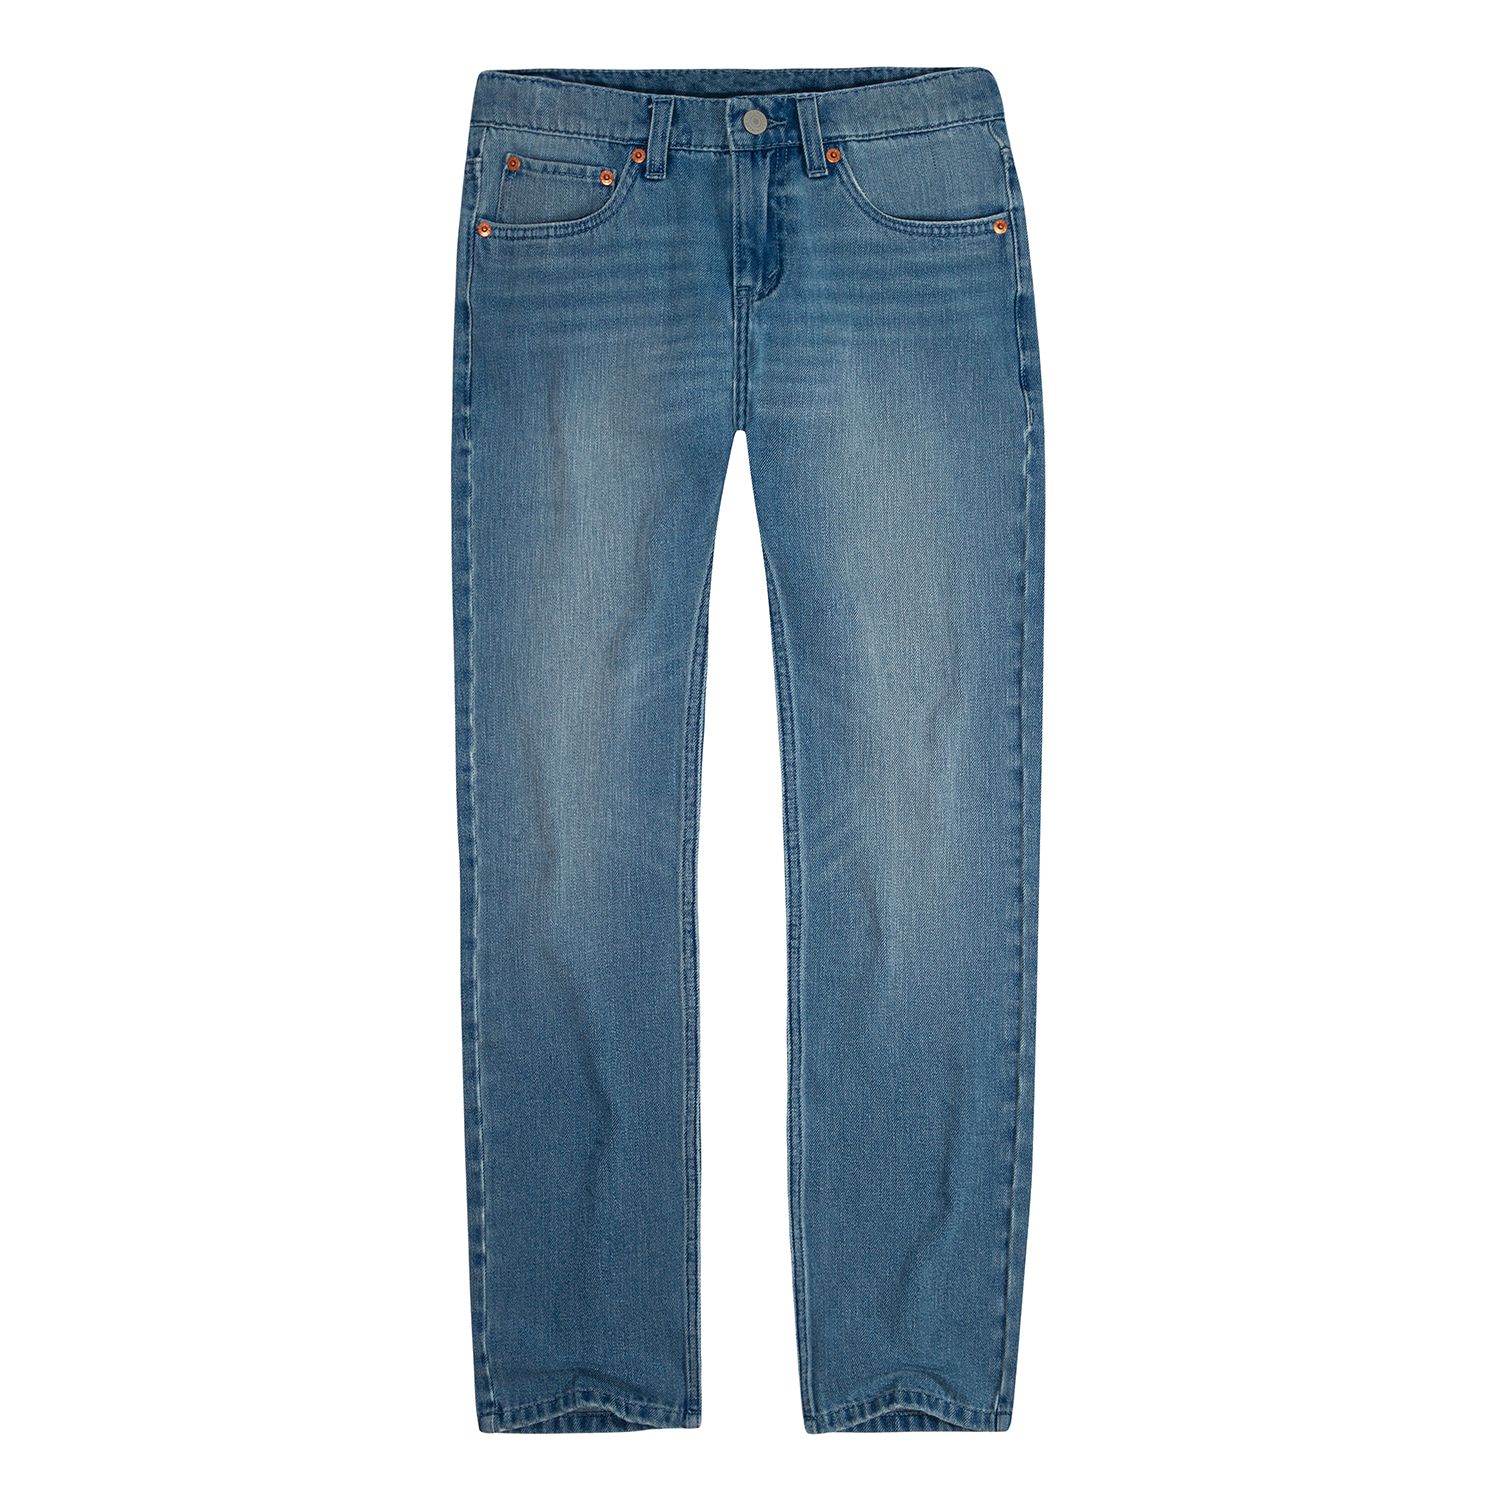 Image for Levi's Boys 8-20 511 Warp Straight-Leg Stretch Jeans at Kohl's.